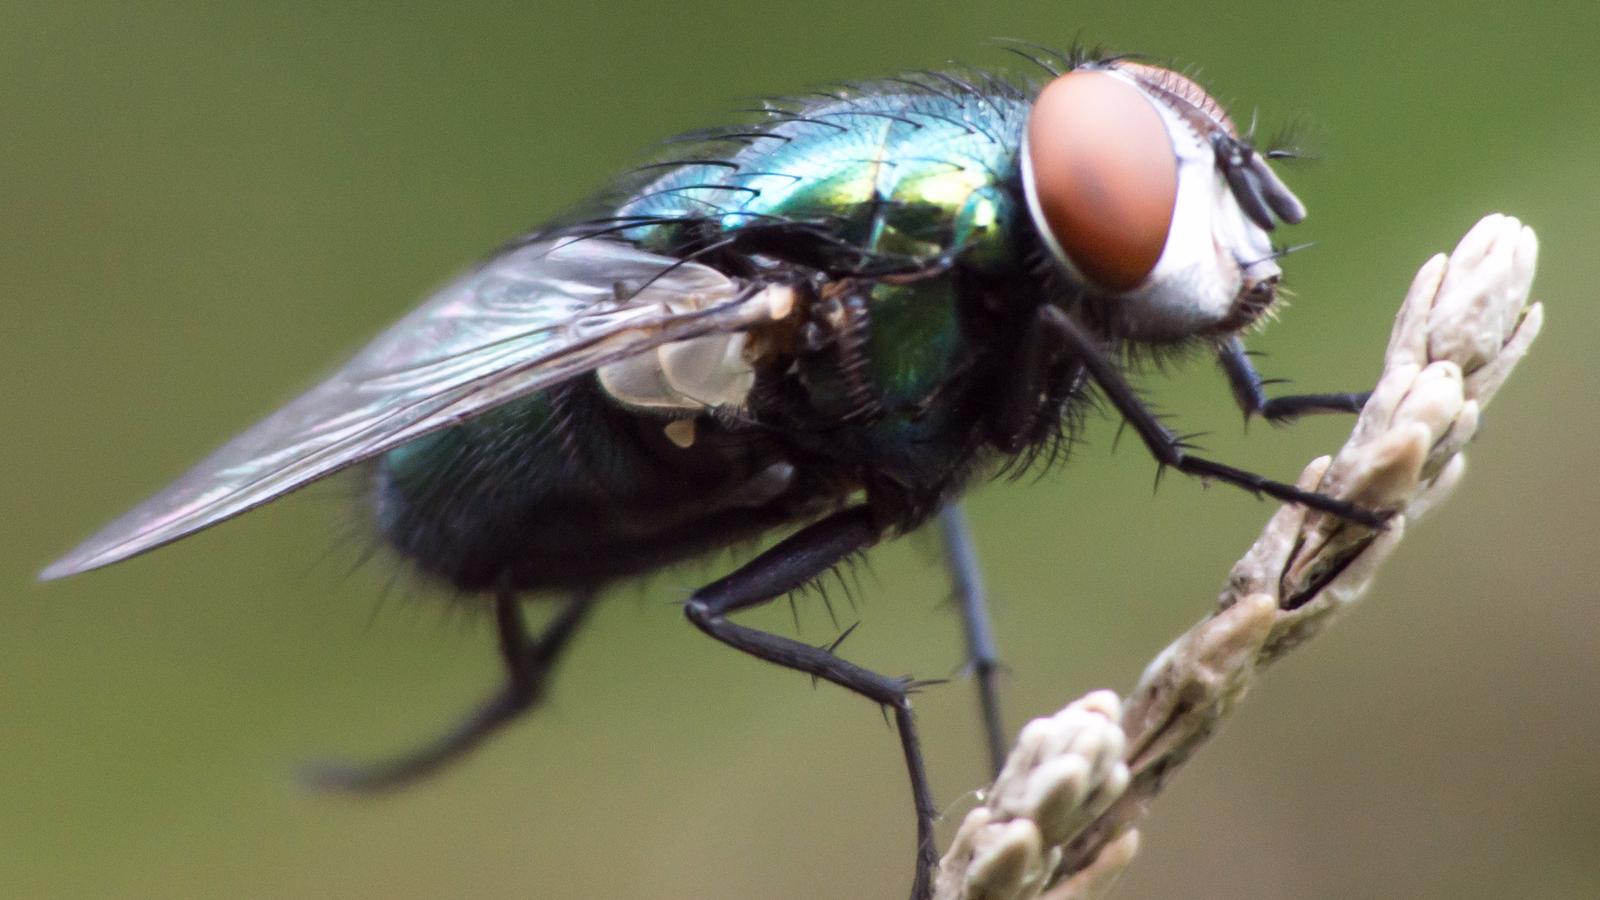 The common housefly makes up just one of 150 families of flies.